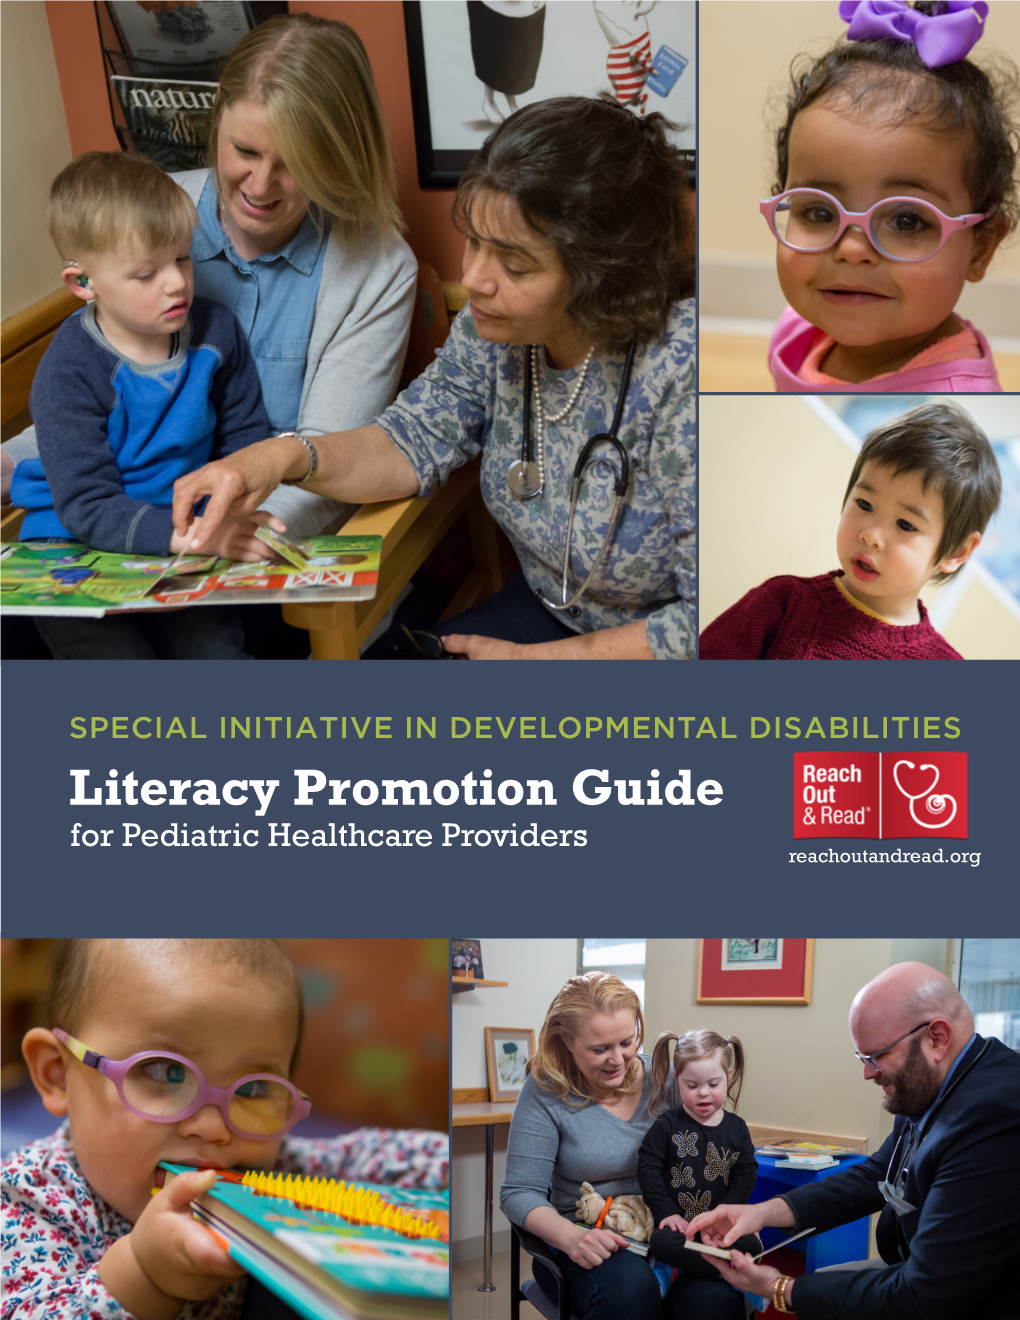 The Developmental Disabilities Literacy Promotion Guide for Pediatric Healthcare Providers Generously Provided by NCR Foundation